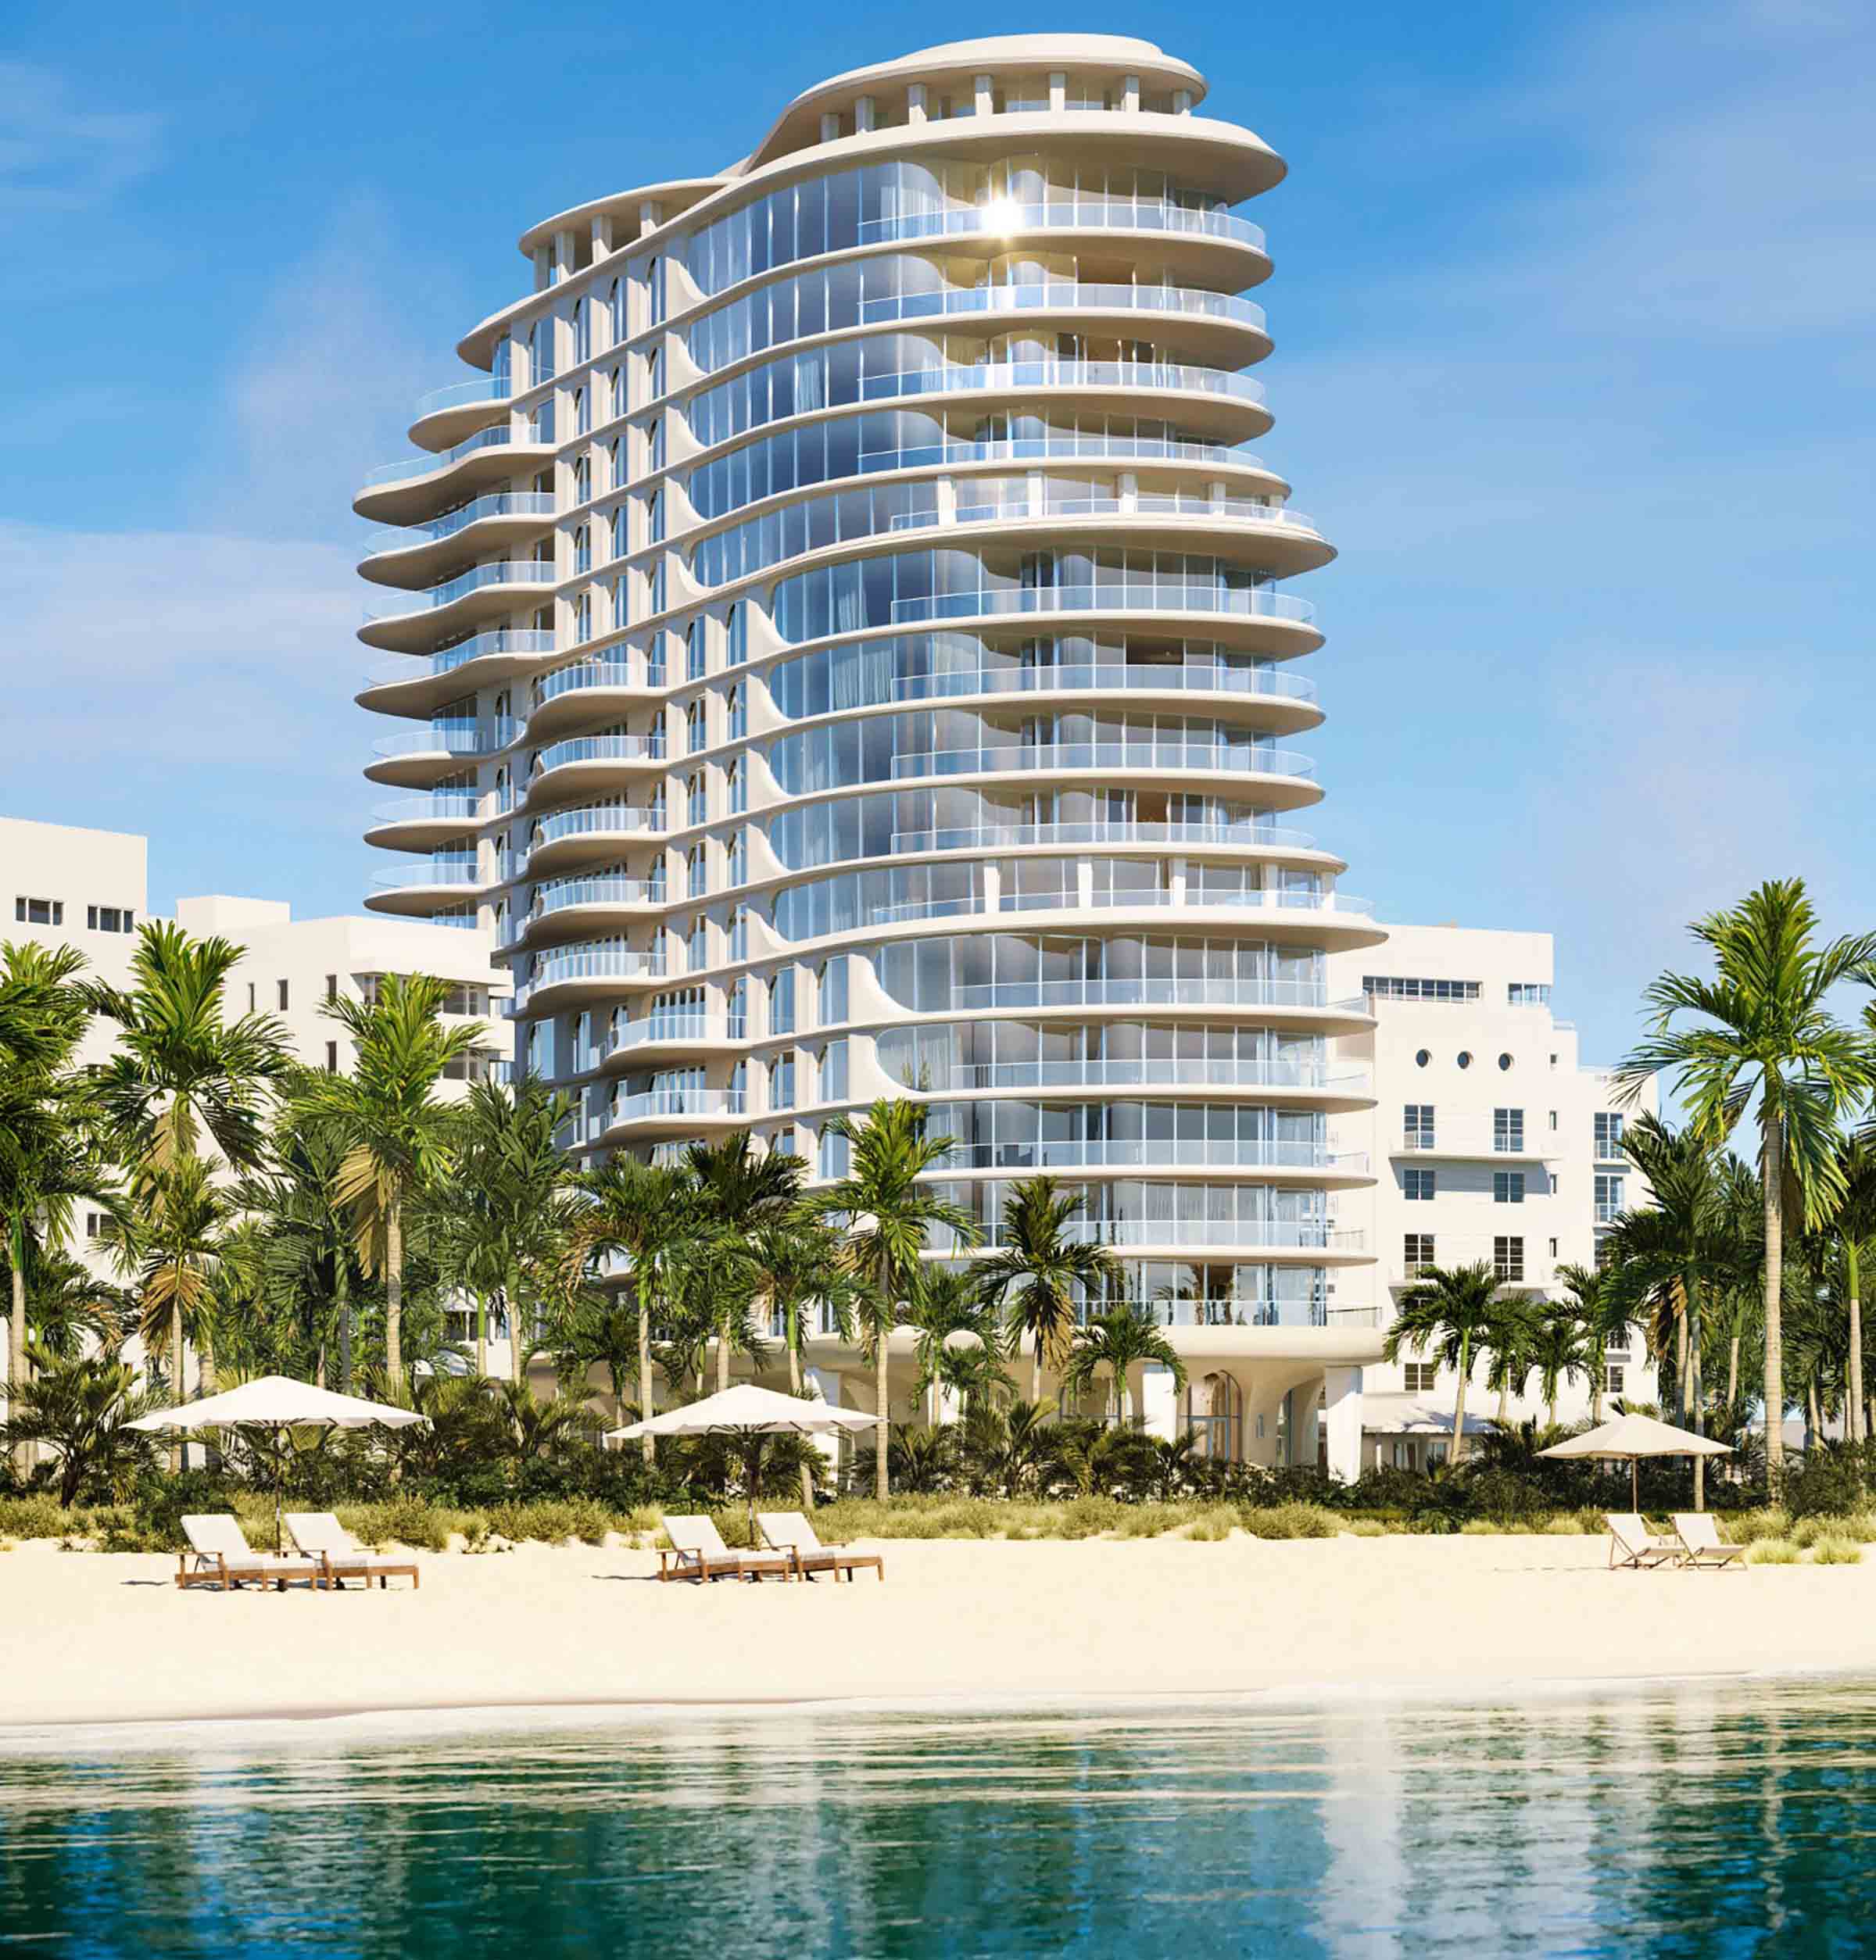 Rendering of The Shore Club Residences South Beach